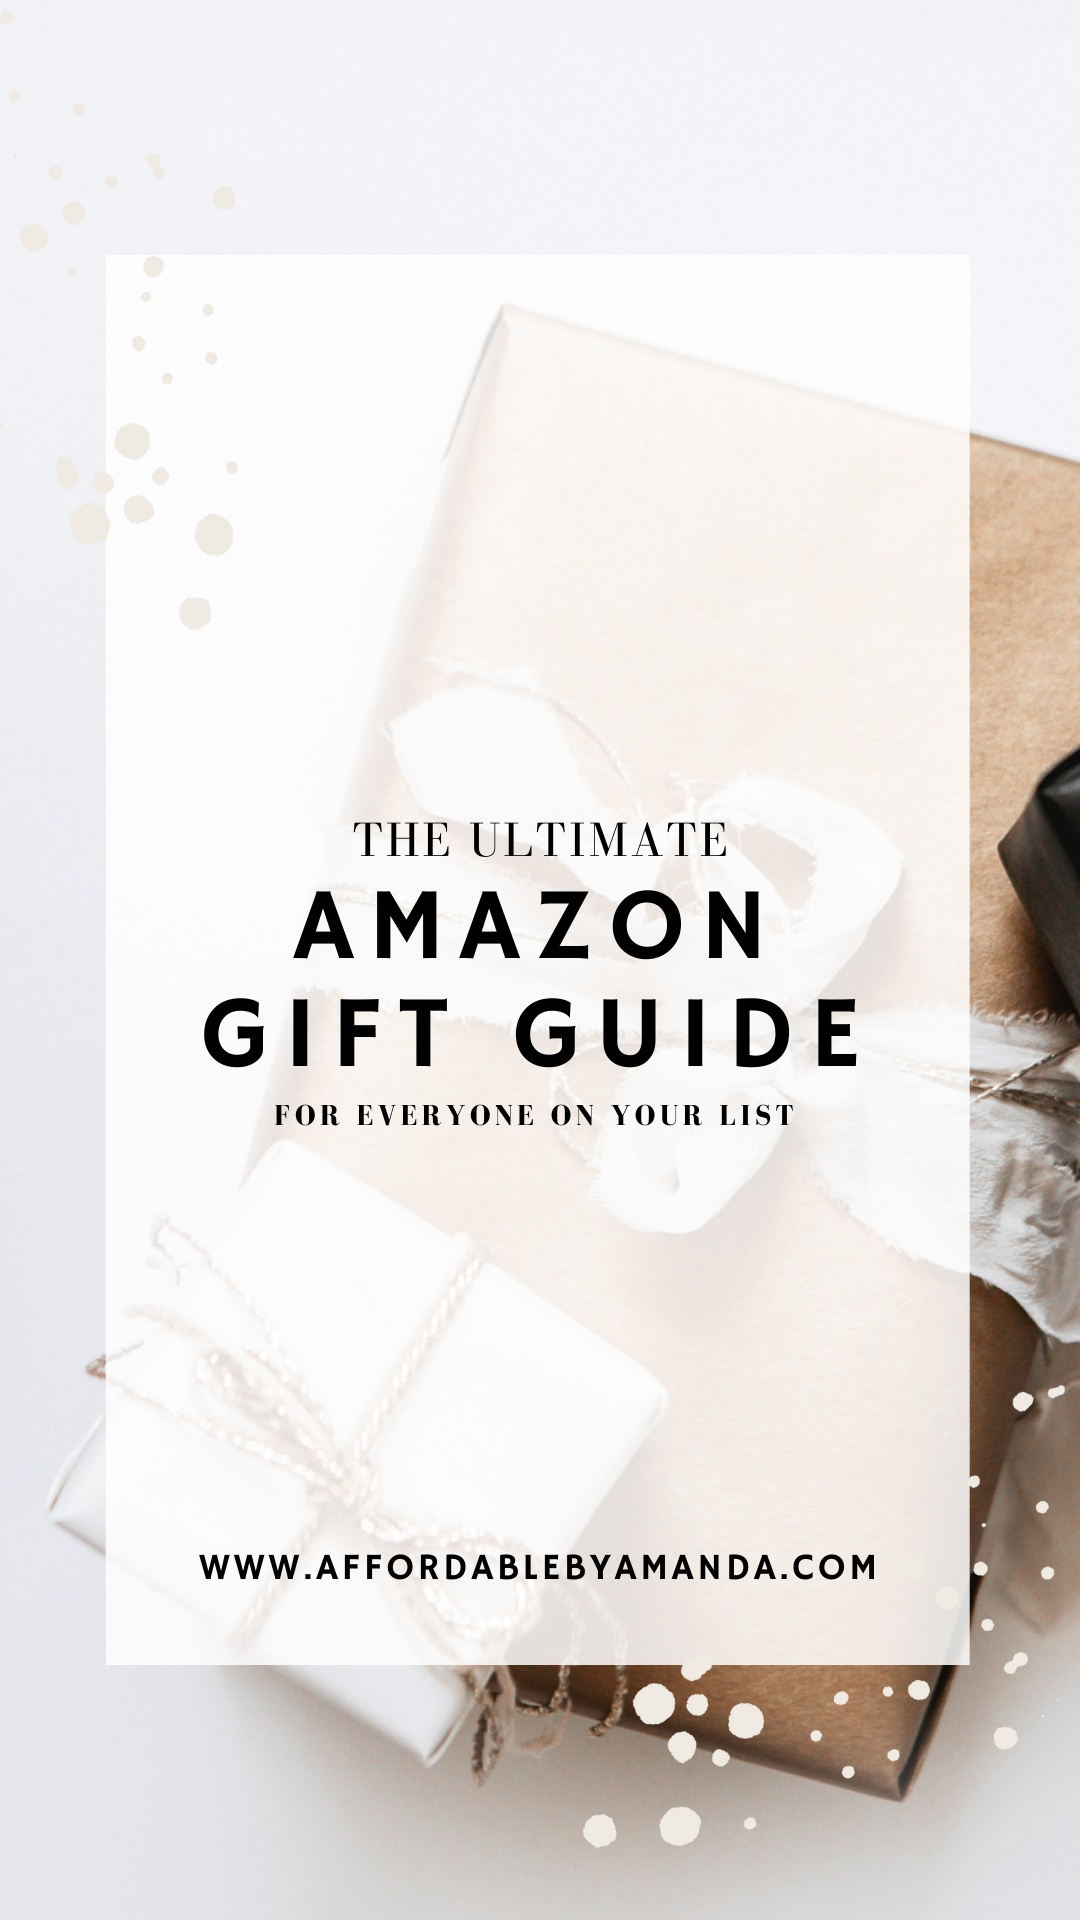 https://affordablebyamanda.com/wp-content/uploads/2021/11/the-ultimate-amazon-gift-guide.png